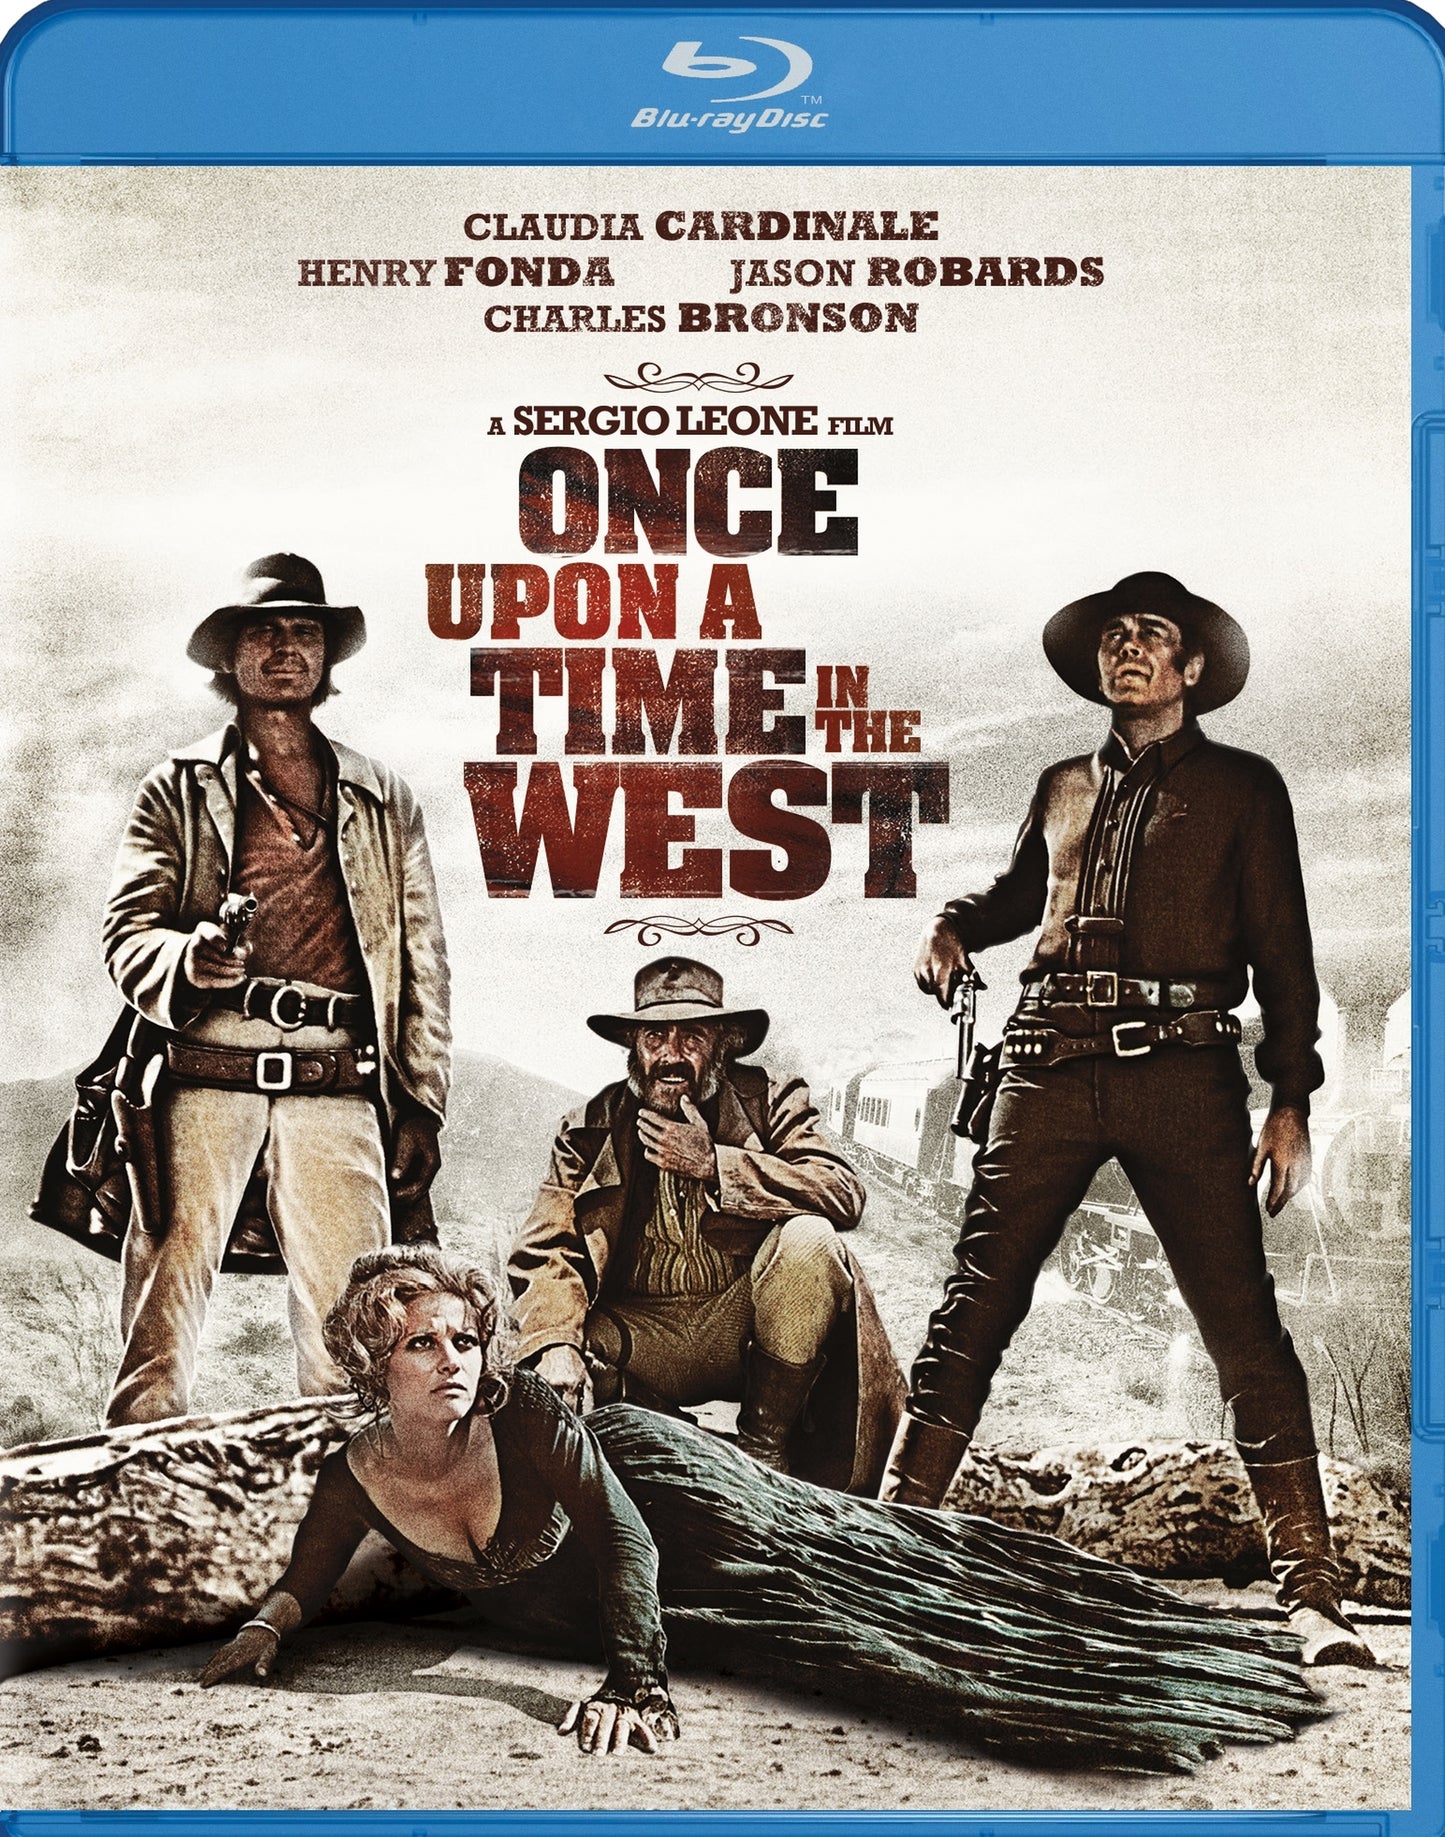 Once Upon a Time in the West [Blu-ray] cover art